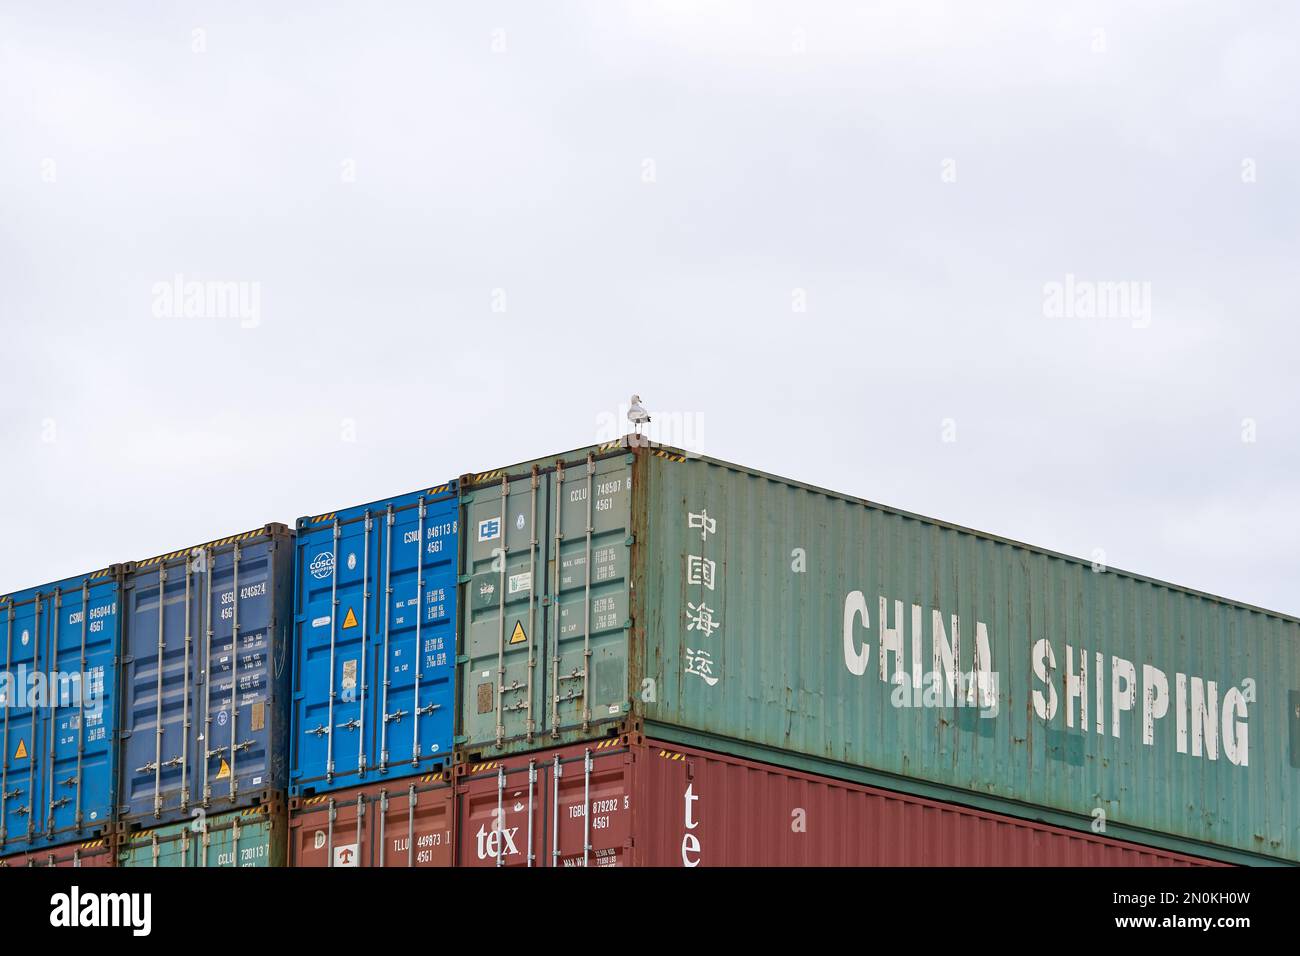 Typical steel shipping containers stacked up on Felixtowe docks, Suffolk, UK Stock Photo